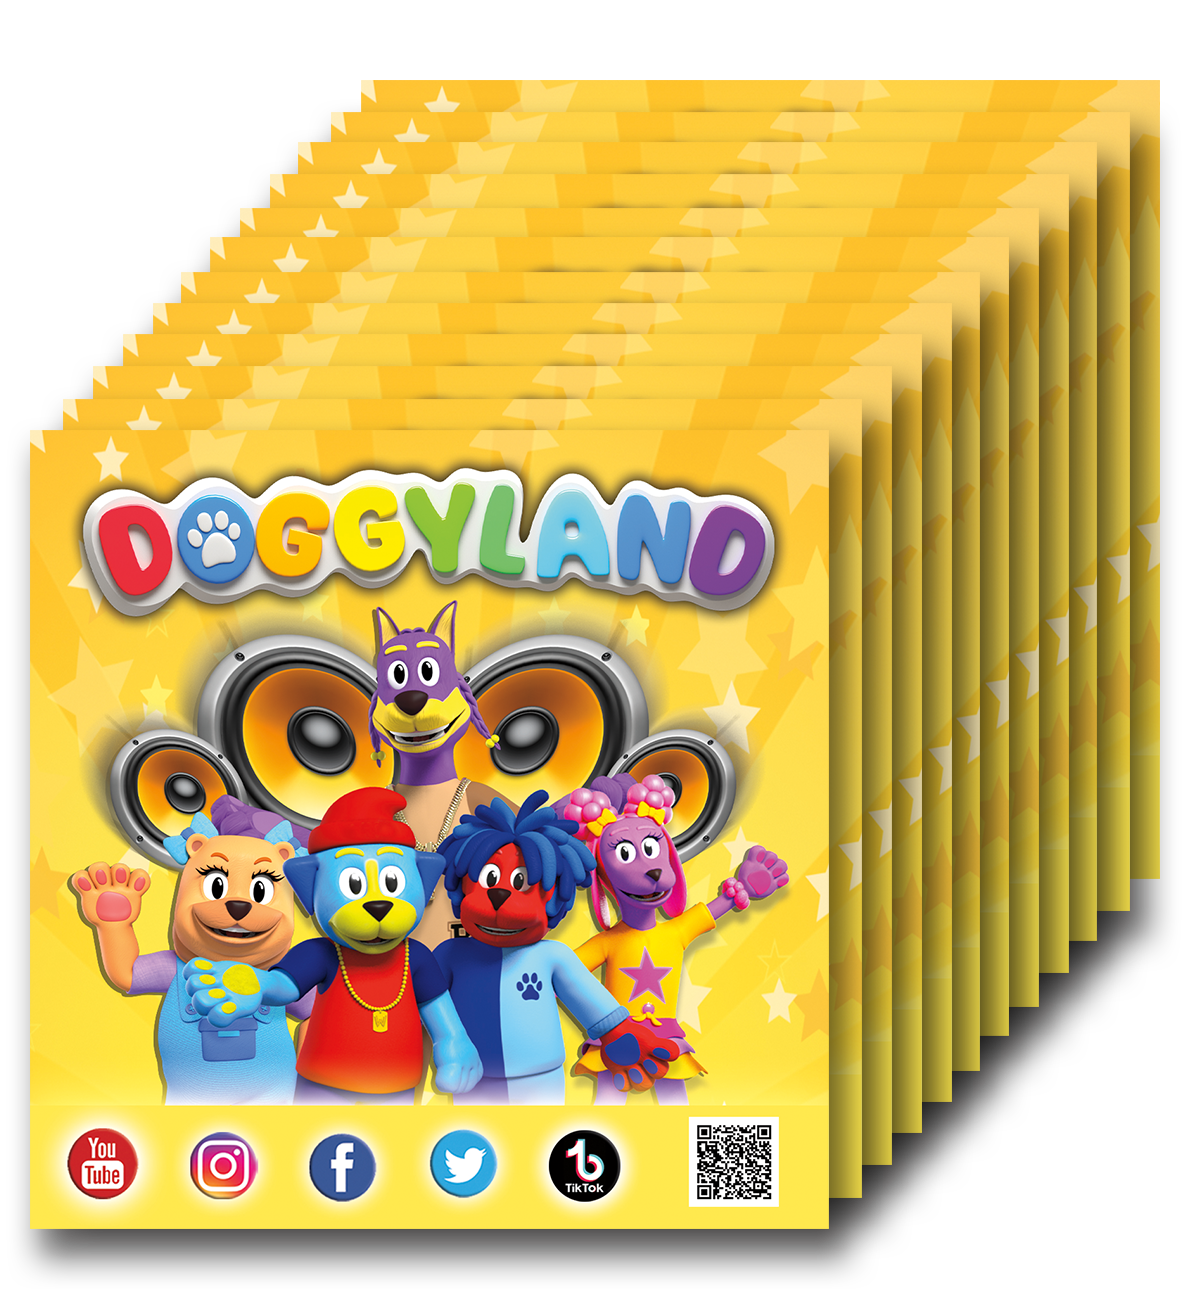 Doggyland Stickers (12 Pack)